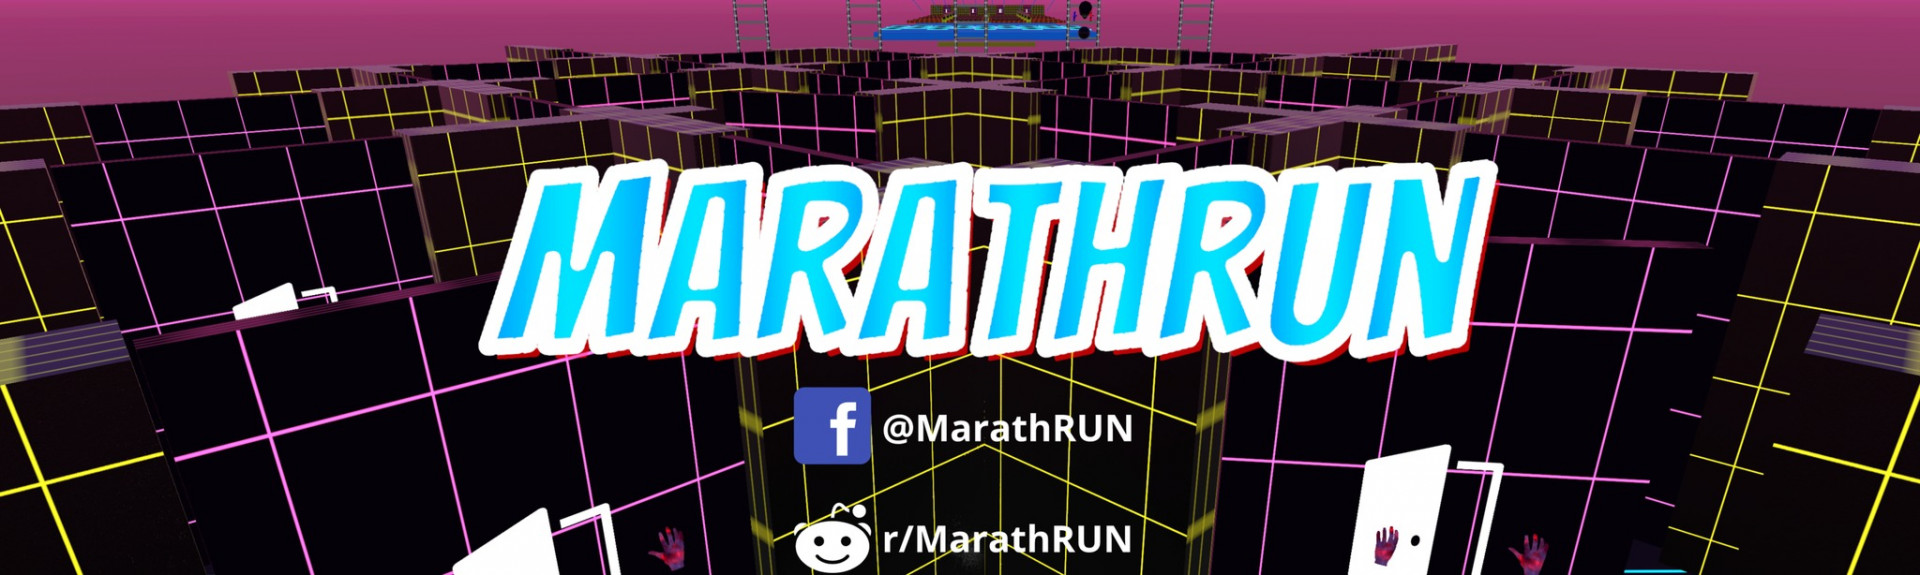 MarathRUN - Ultimate Obstacle Course